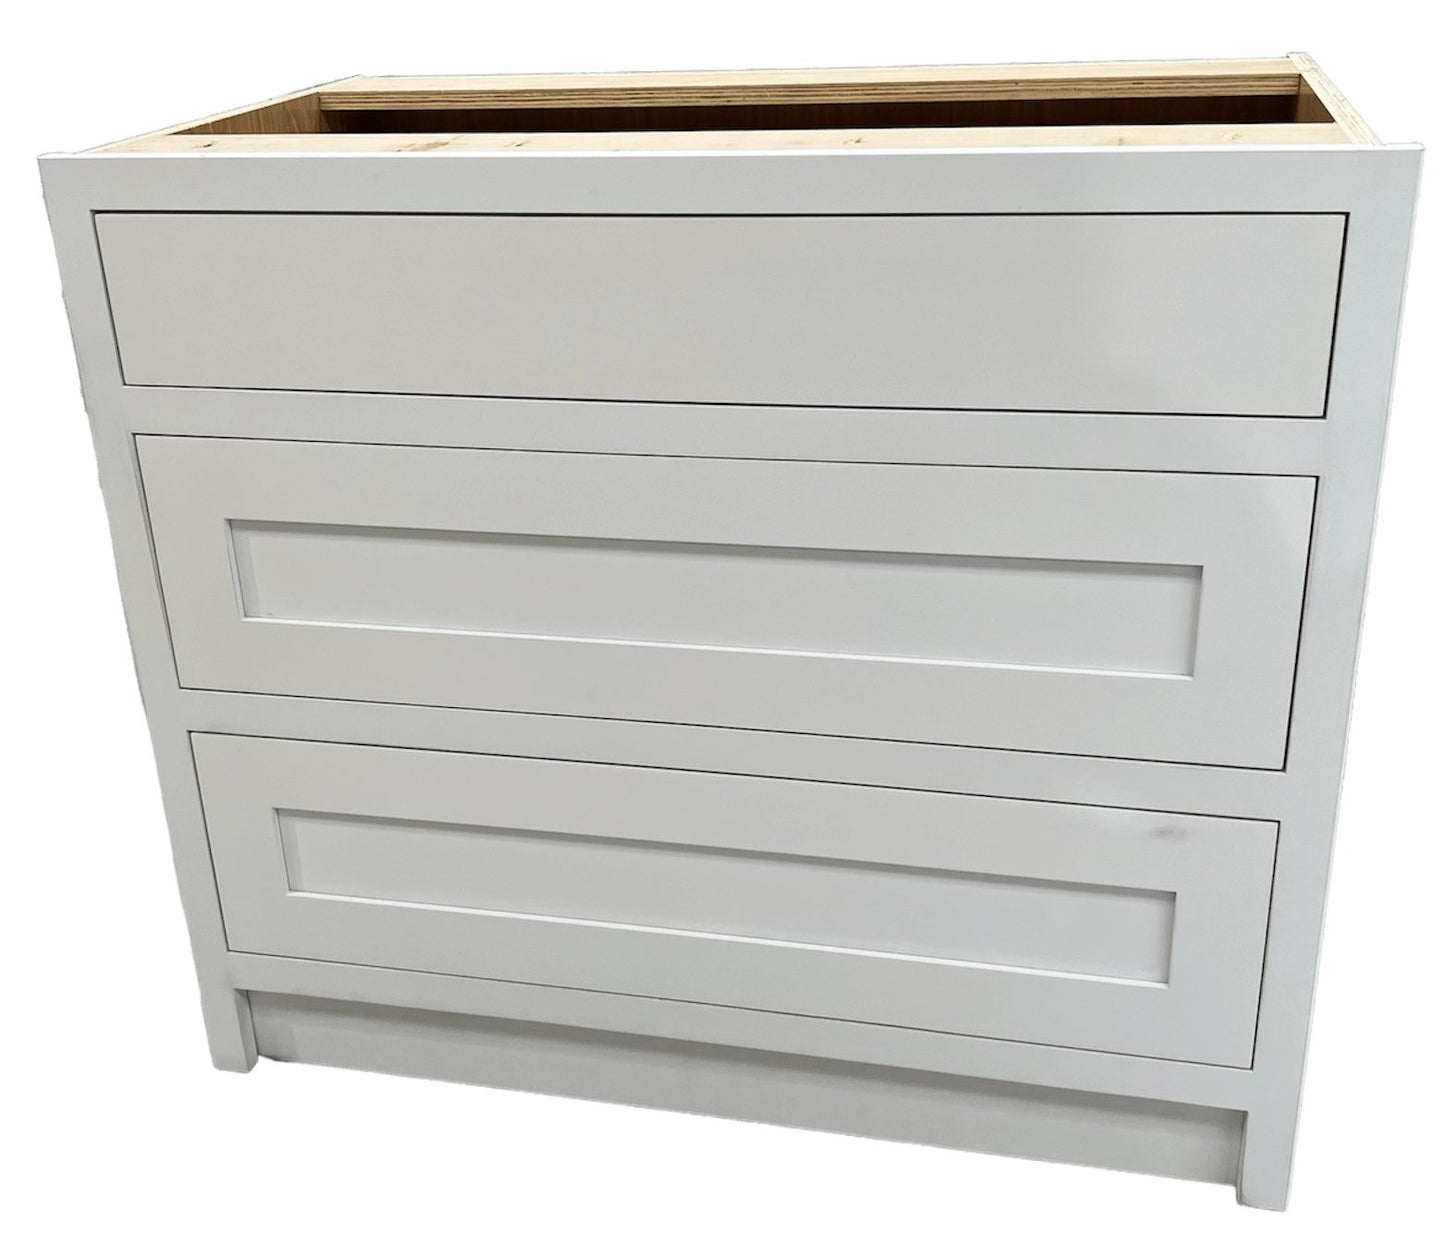 BD3 1000 - 1000mm Wide 3 drawer base unit - Classic Kitchens Direct